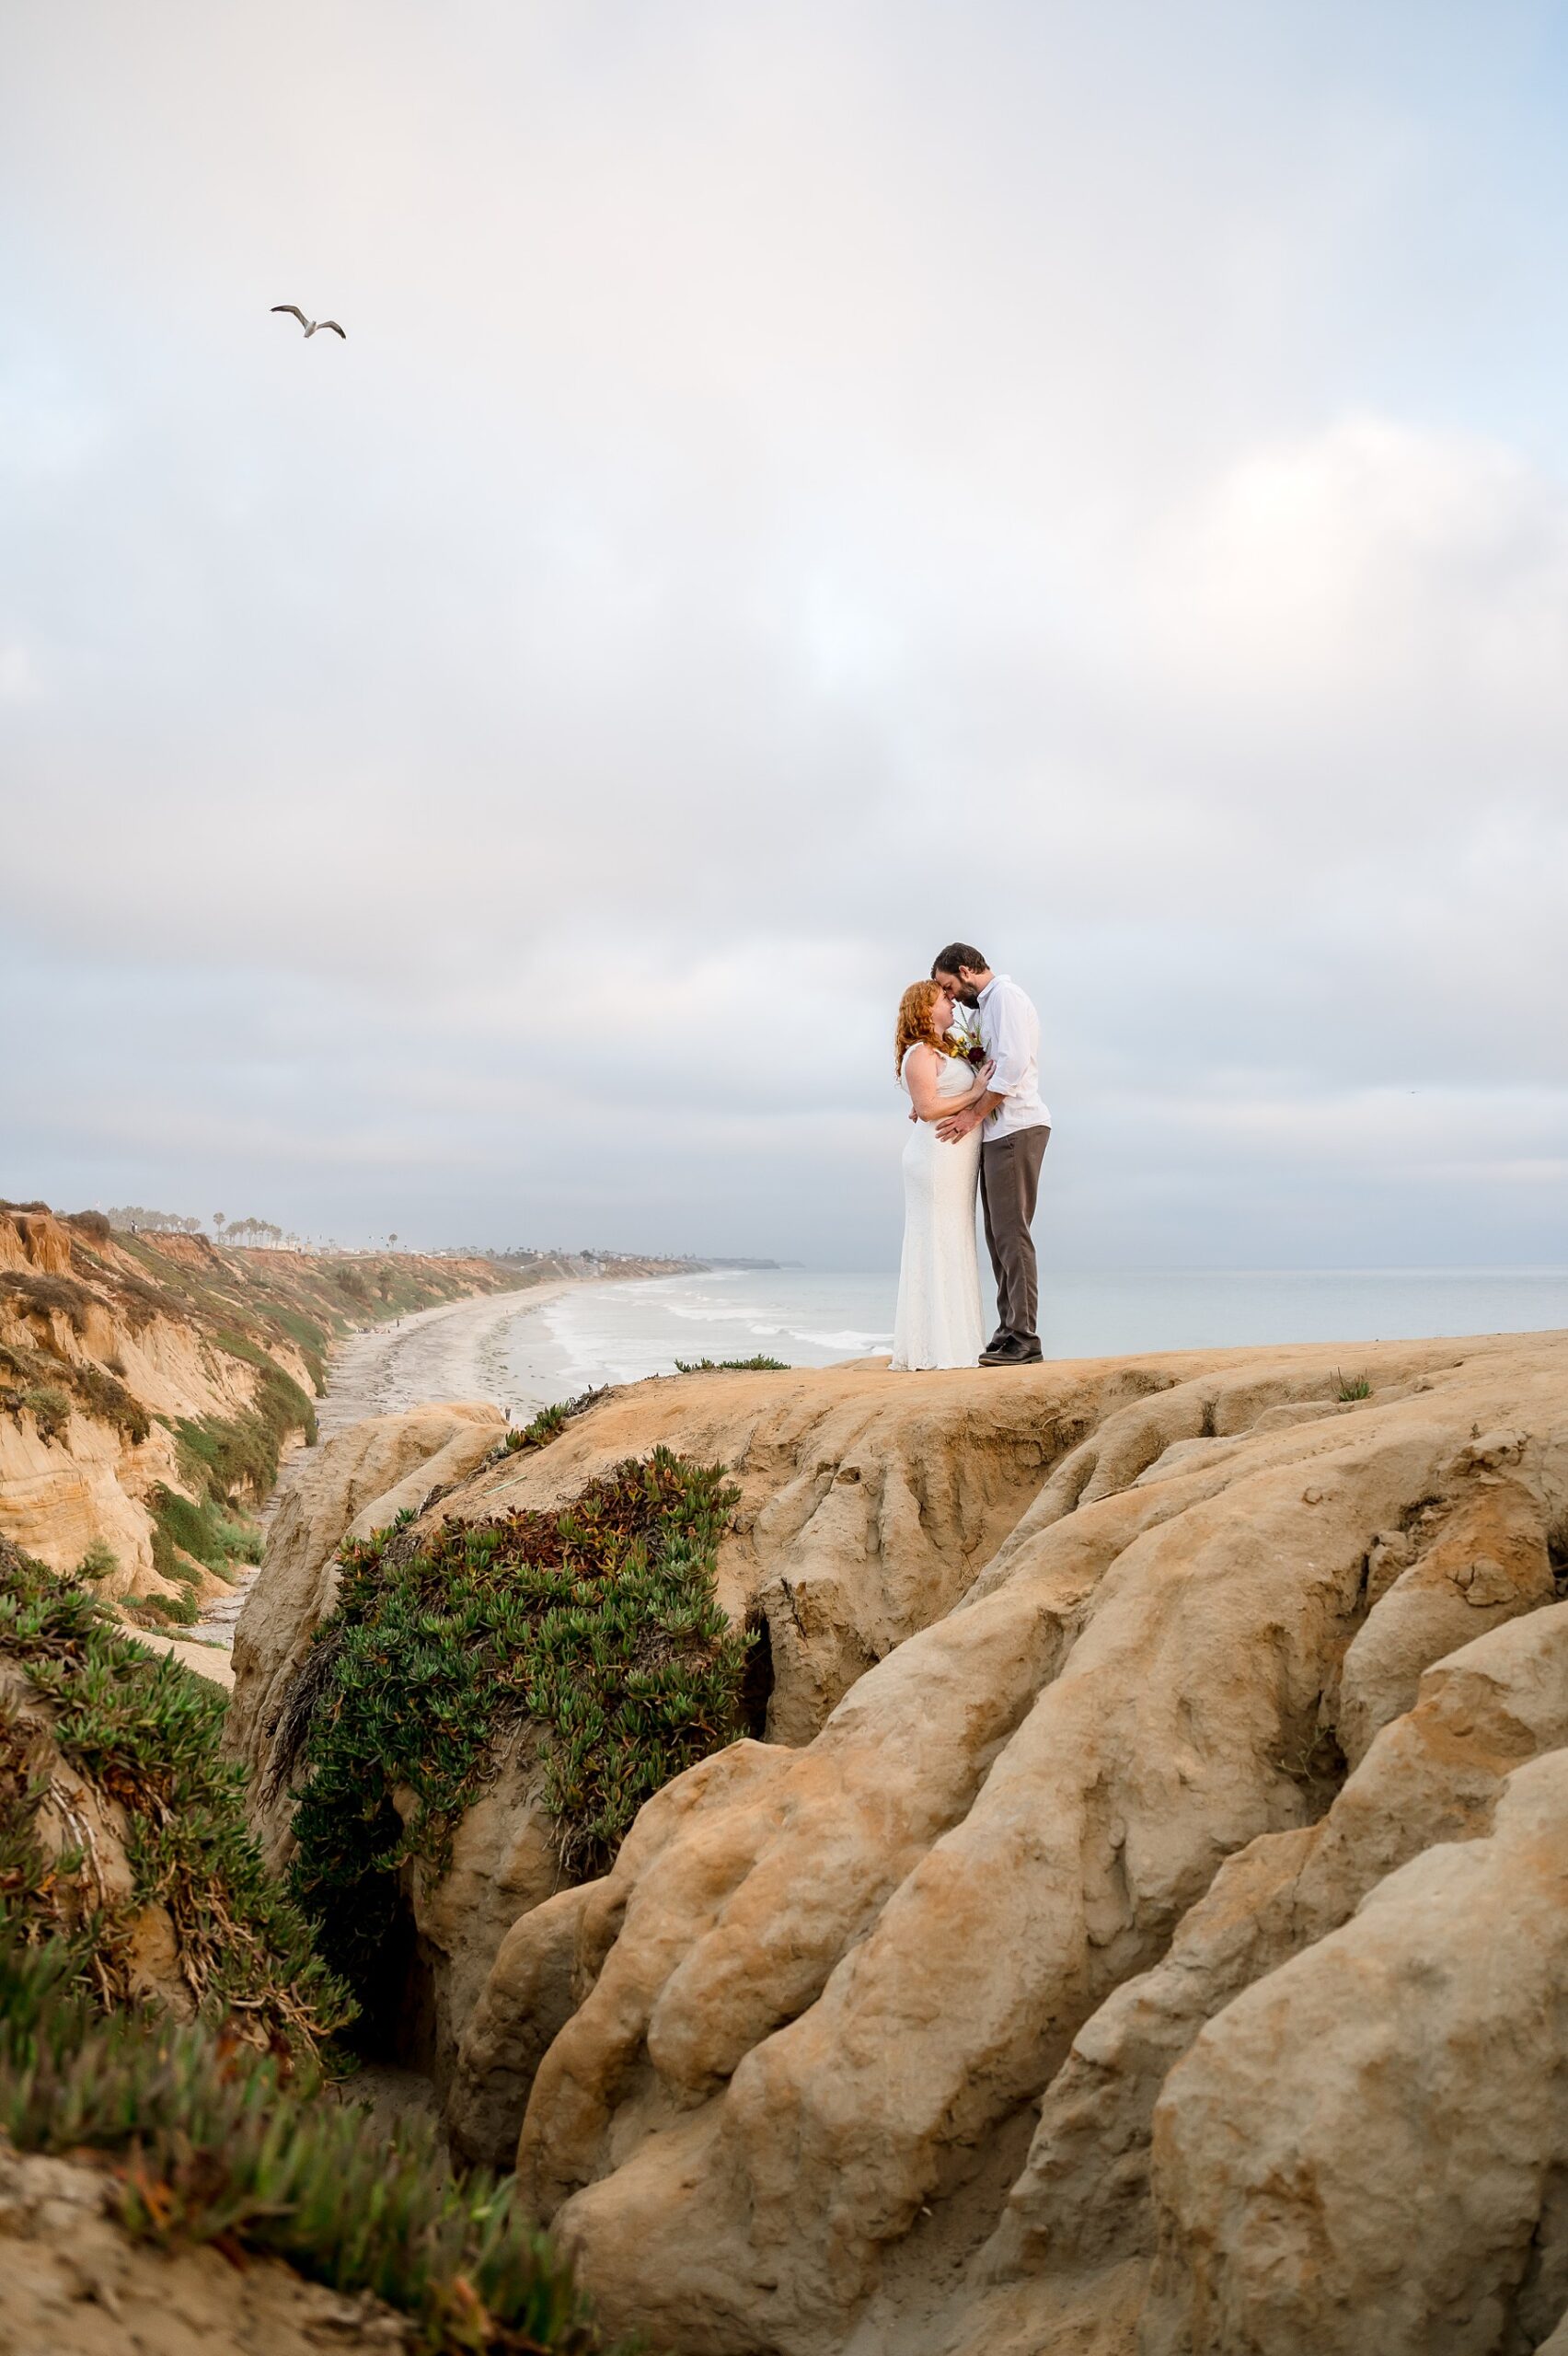 Bride and groom on Cliffs by ocean Southern California Wedding Photos